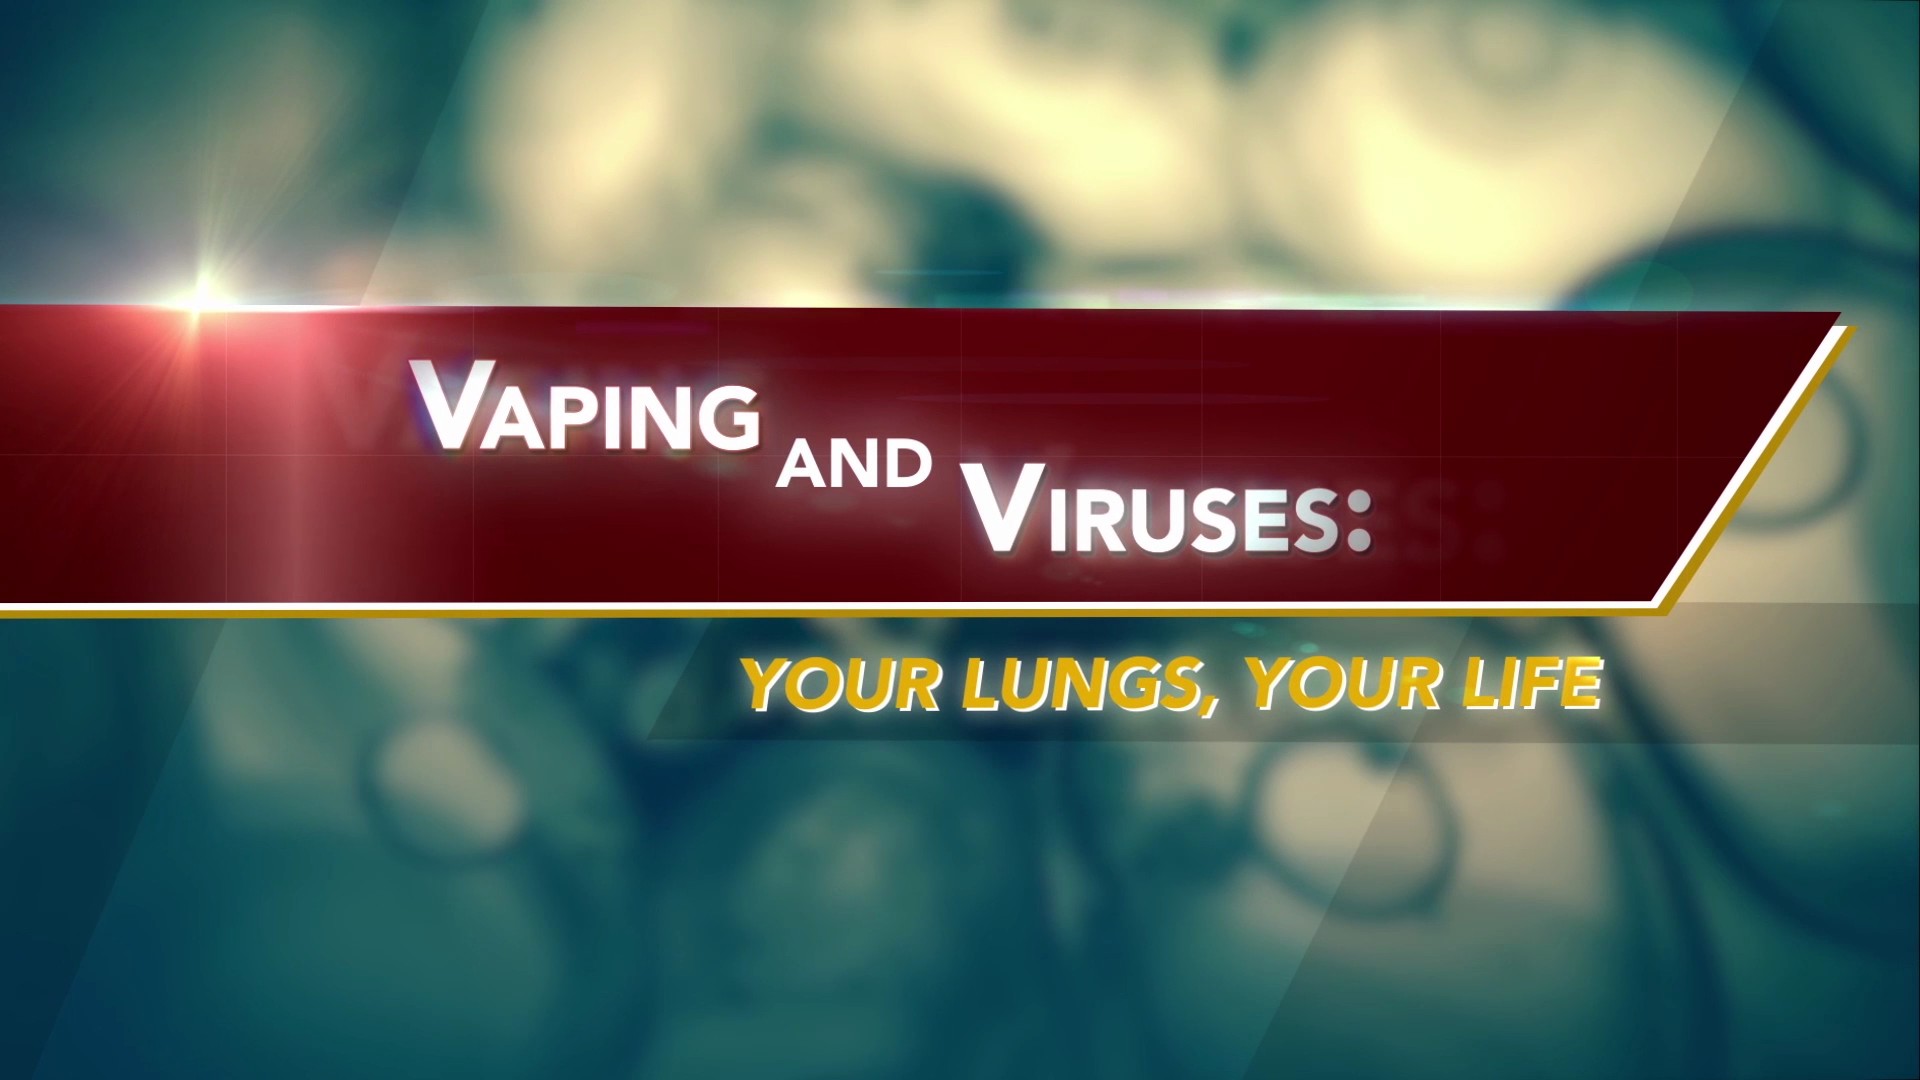 Vaping and Viruses: Your Lungs, Your Life
